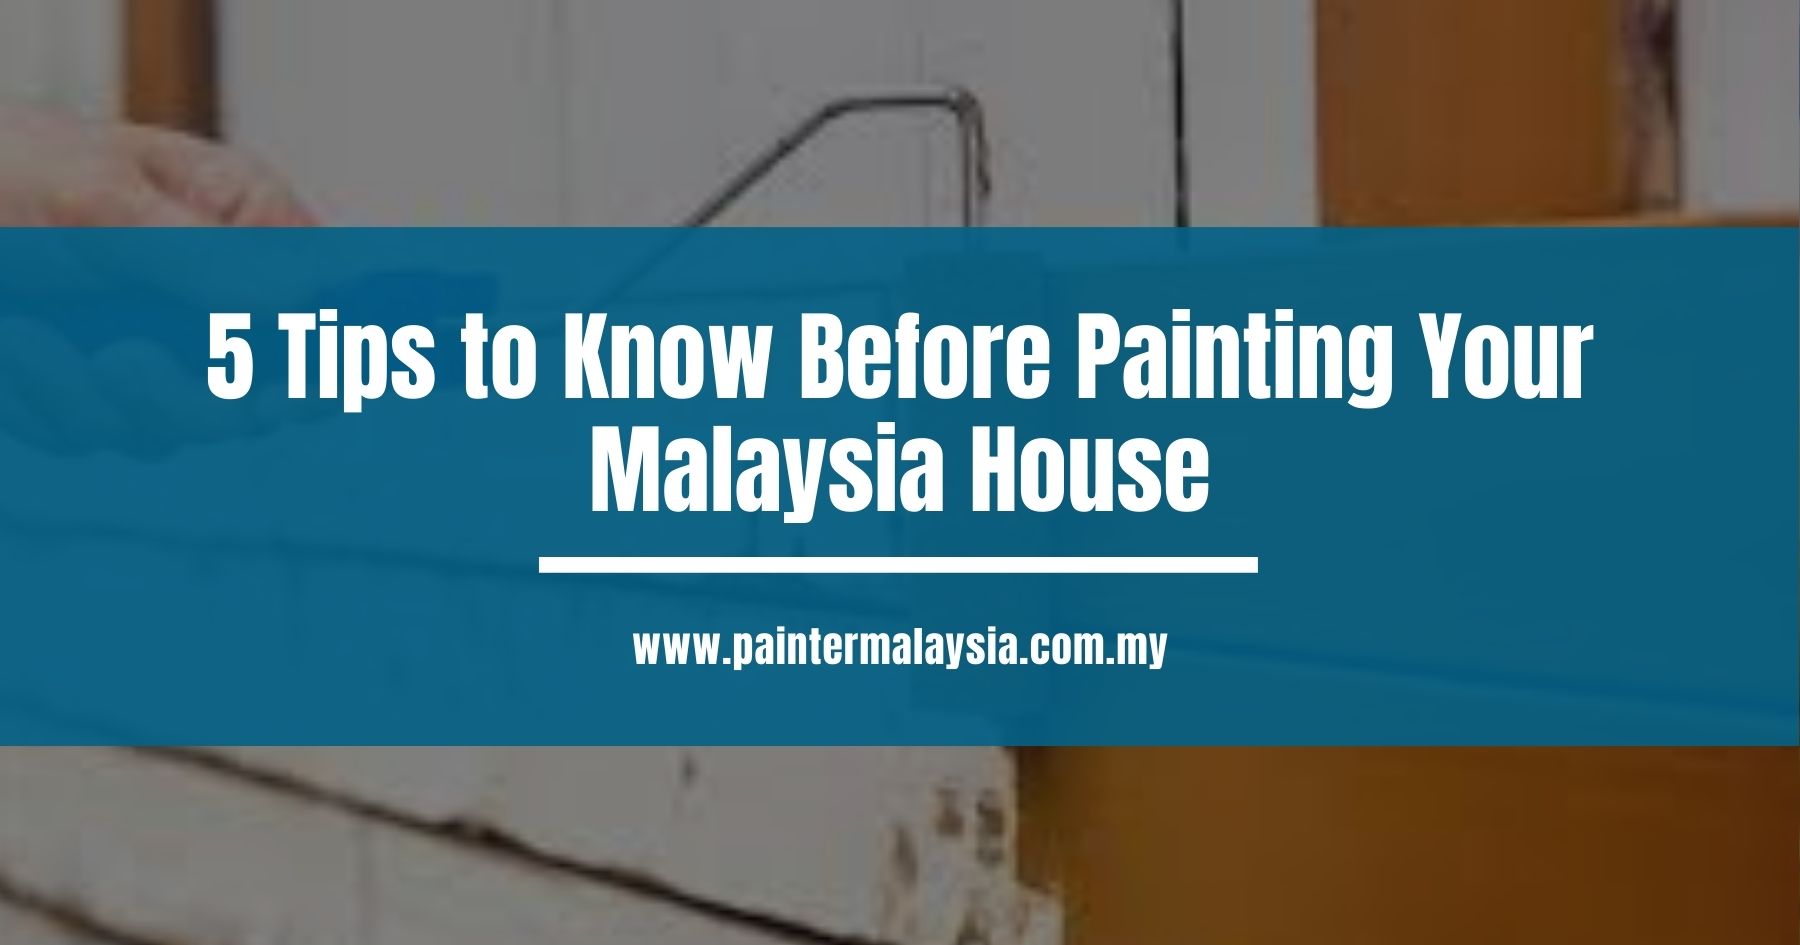 5 Tips to Know Before Painting Your Malaysia House